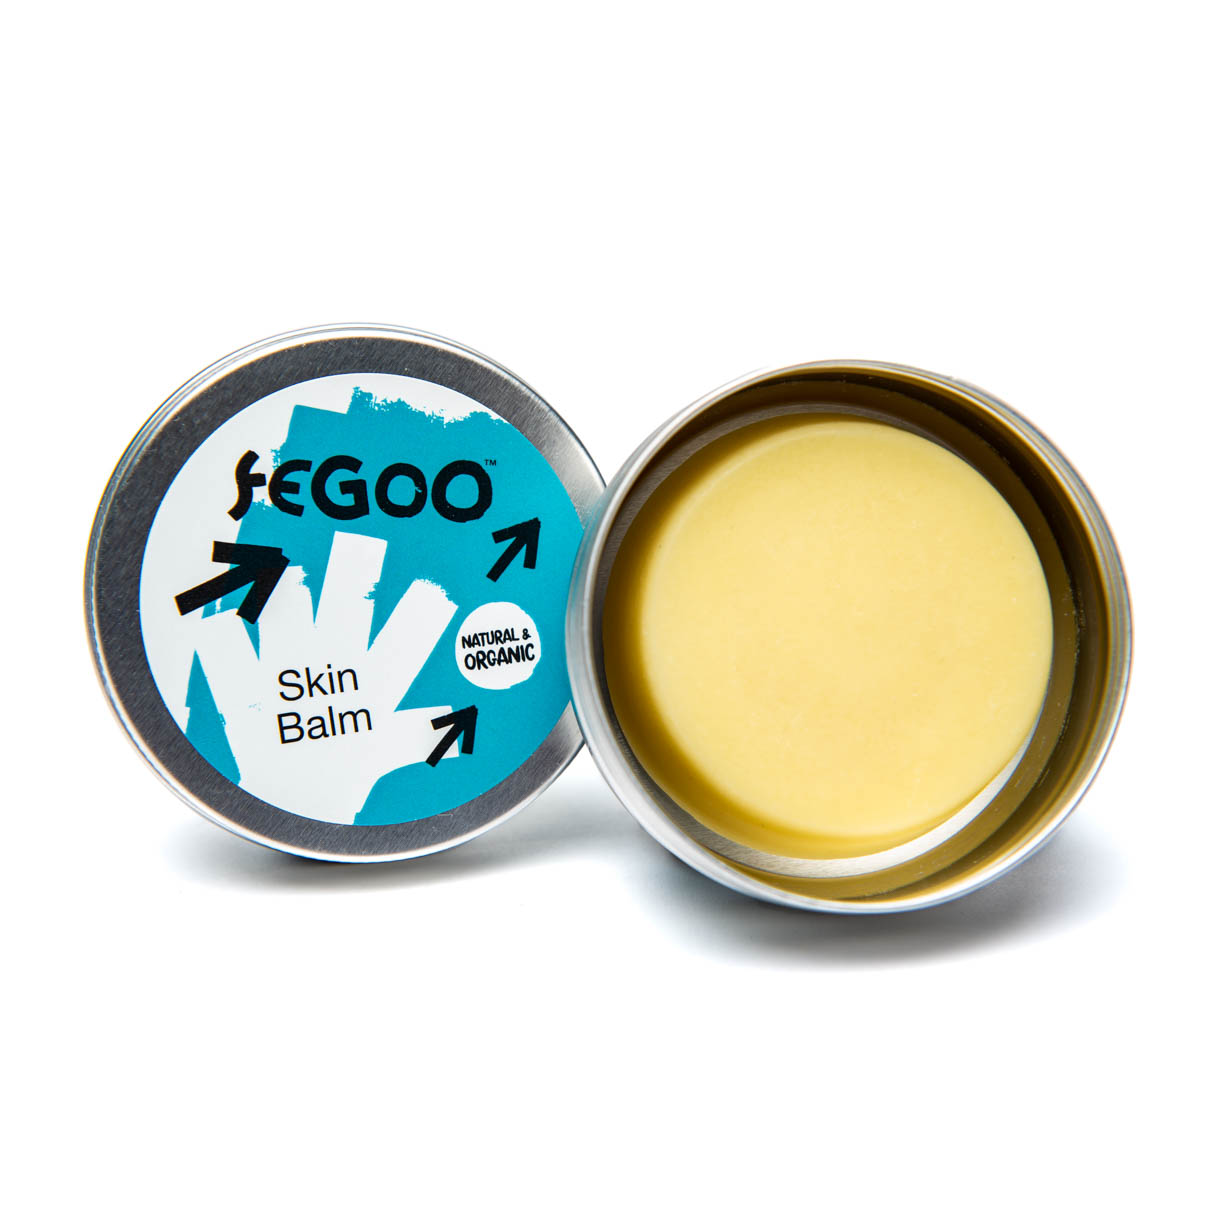 hand, foot, elbow, dog paw moisturiser. Like climb on for climbers but made in the UK